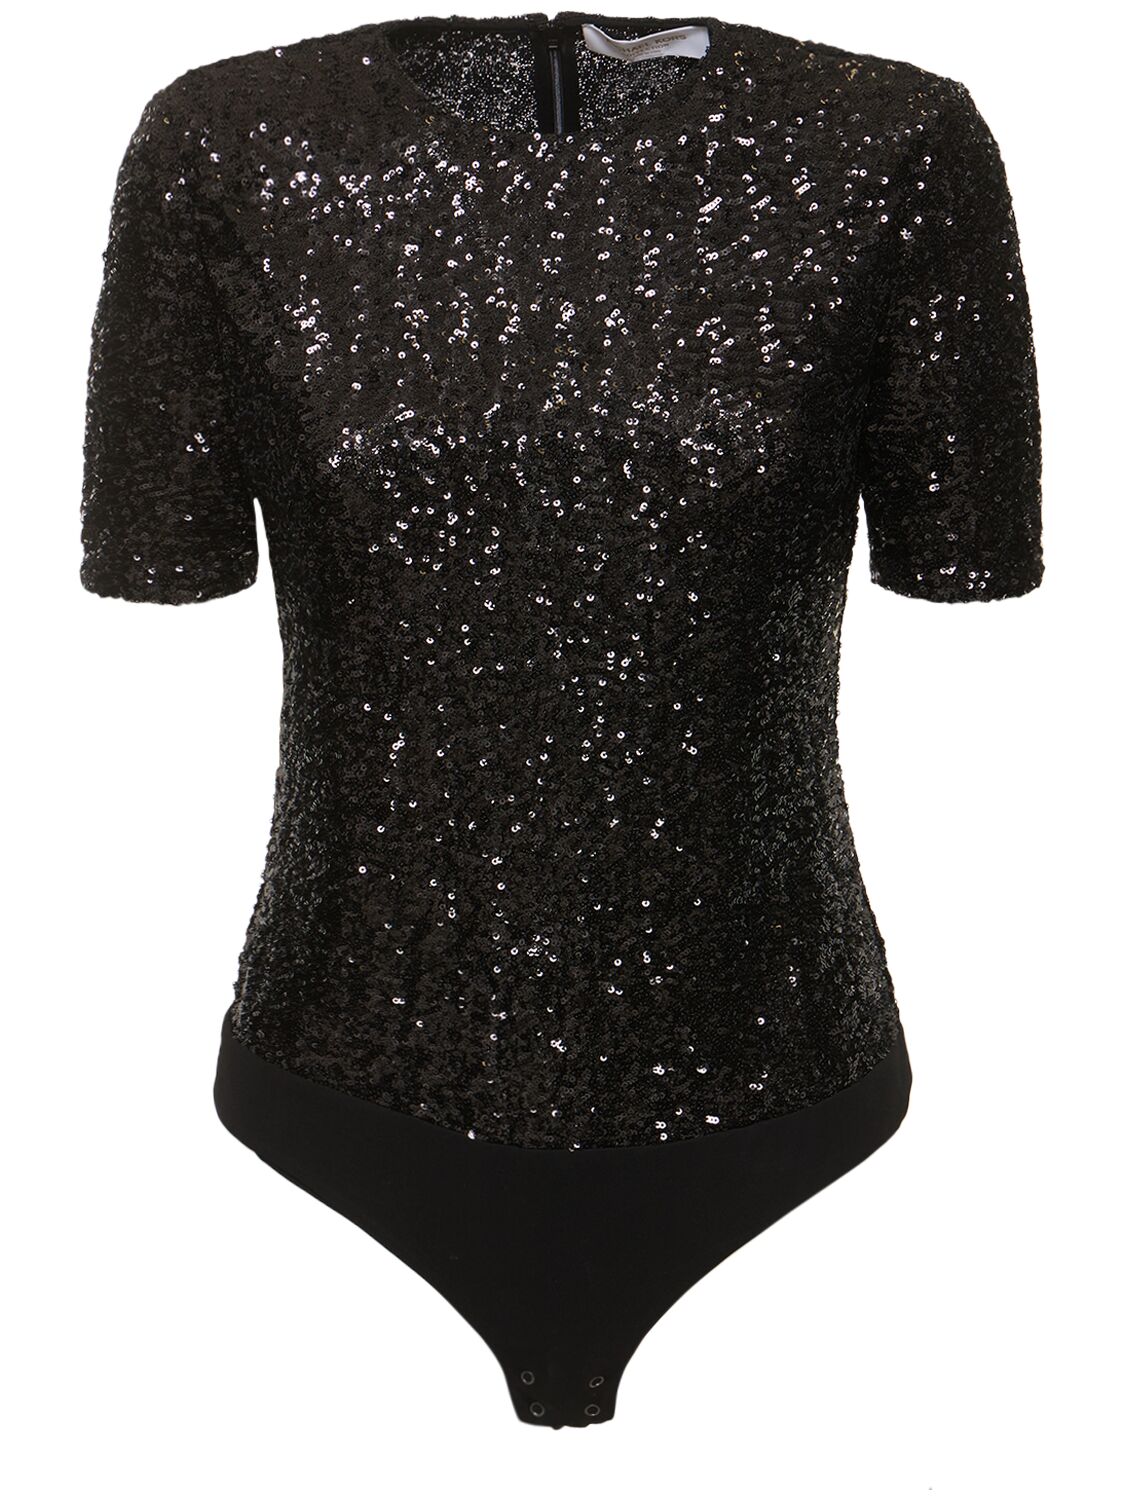 Image of Sequined Bodysuit